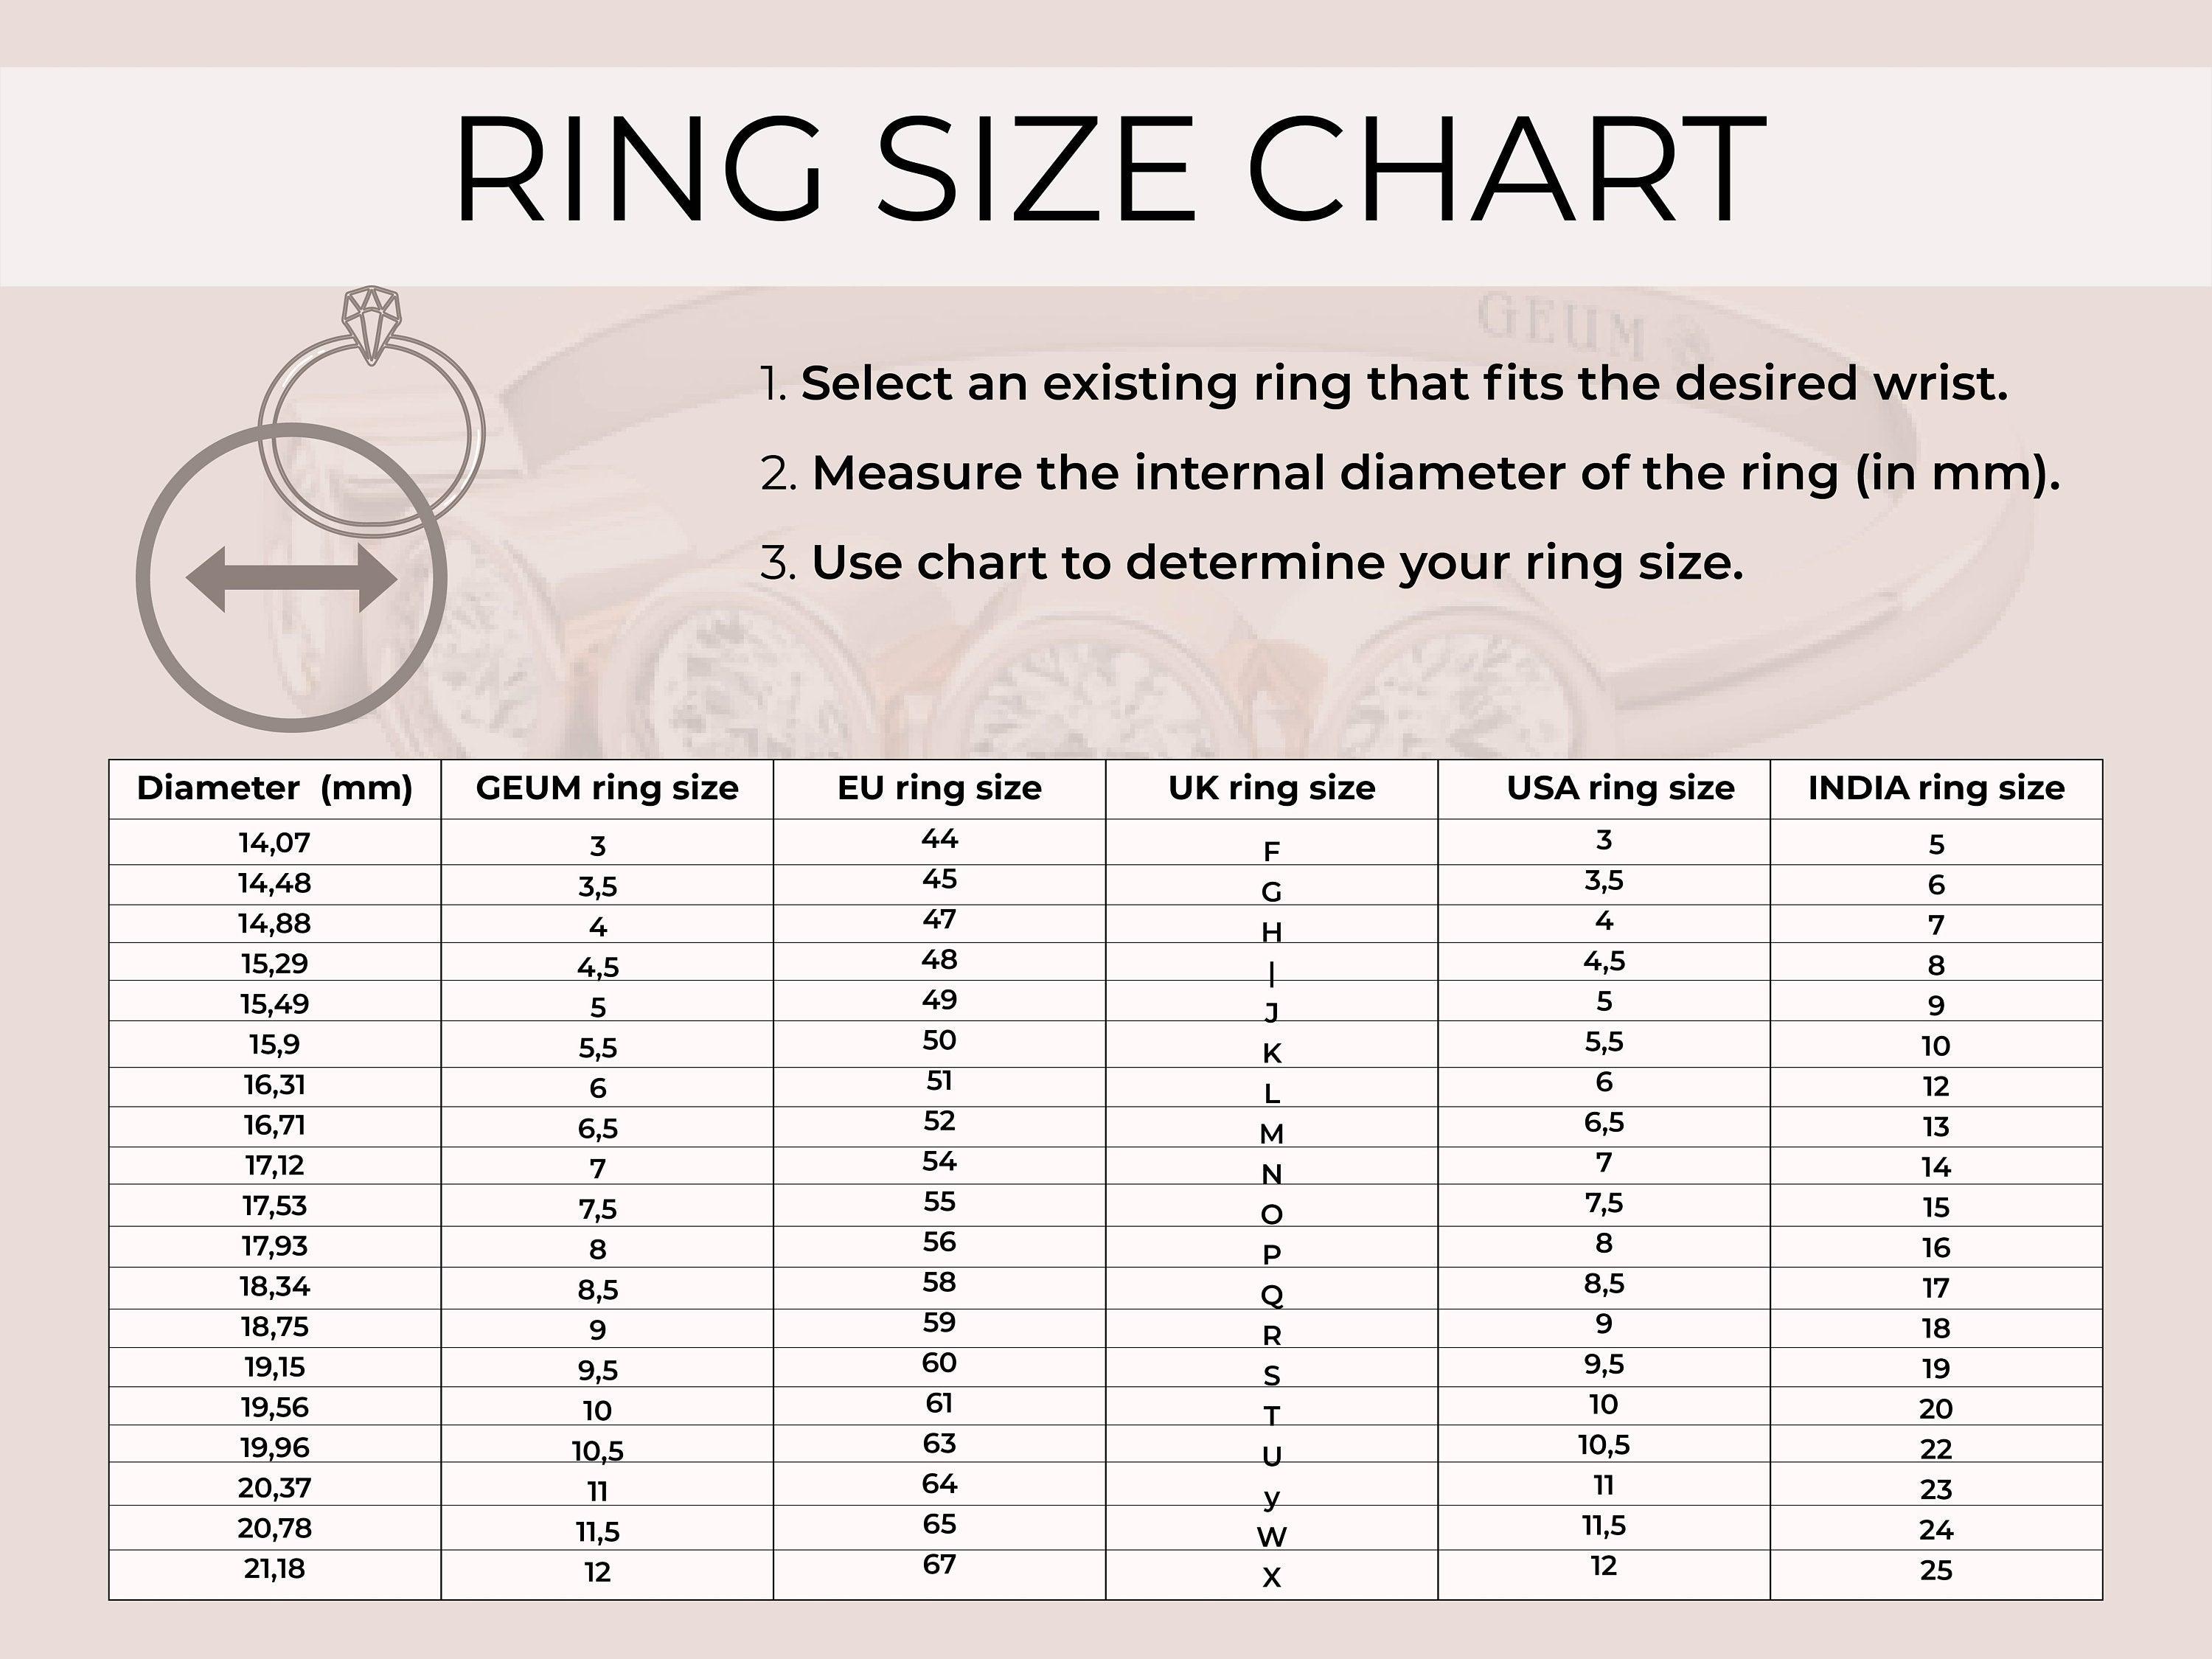 Unique Rose Gold Ring, Real Diamond Proposal Ring,10kt 14kt 18kt White/Yellow Gold Jewelry - GeumJewels